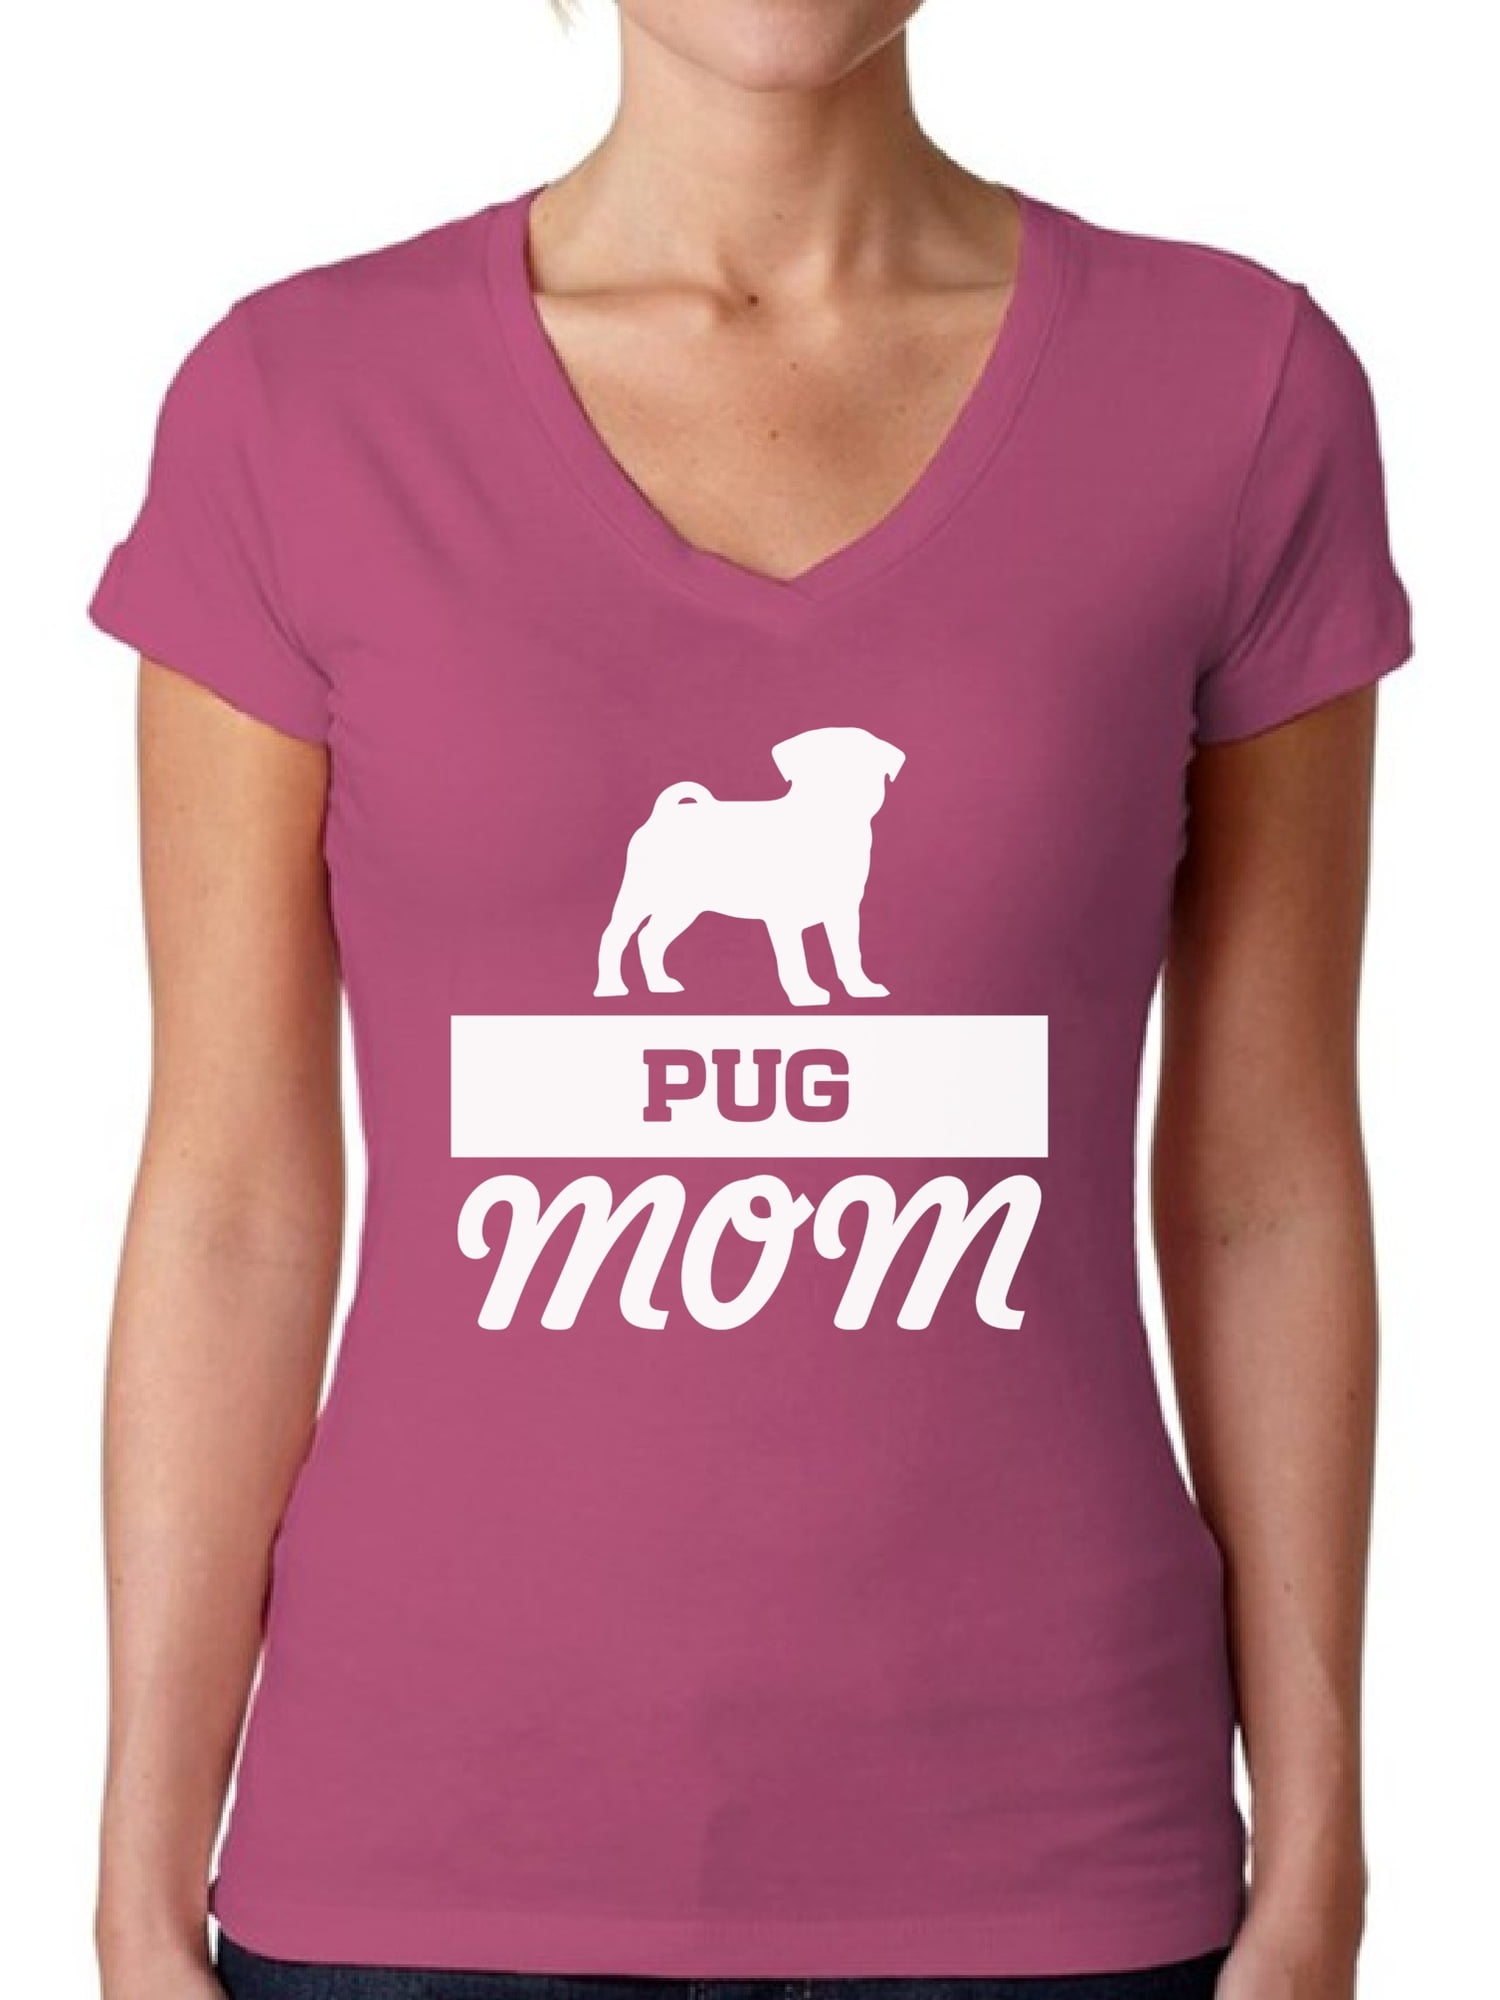 PUG IN PINK #1 PERSONALISED CHILDS T-SHIRT 